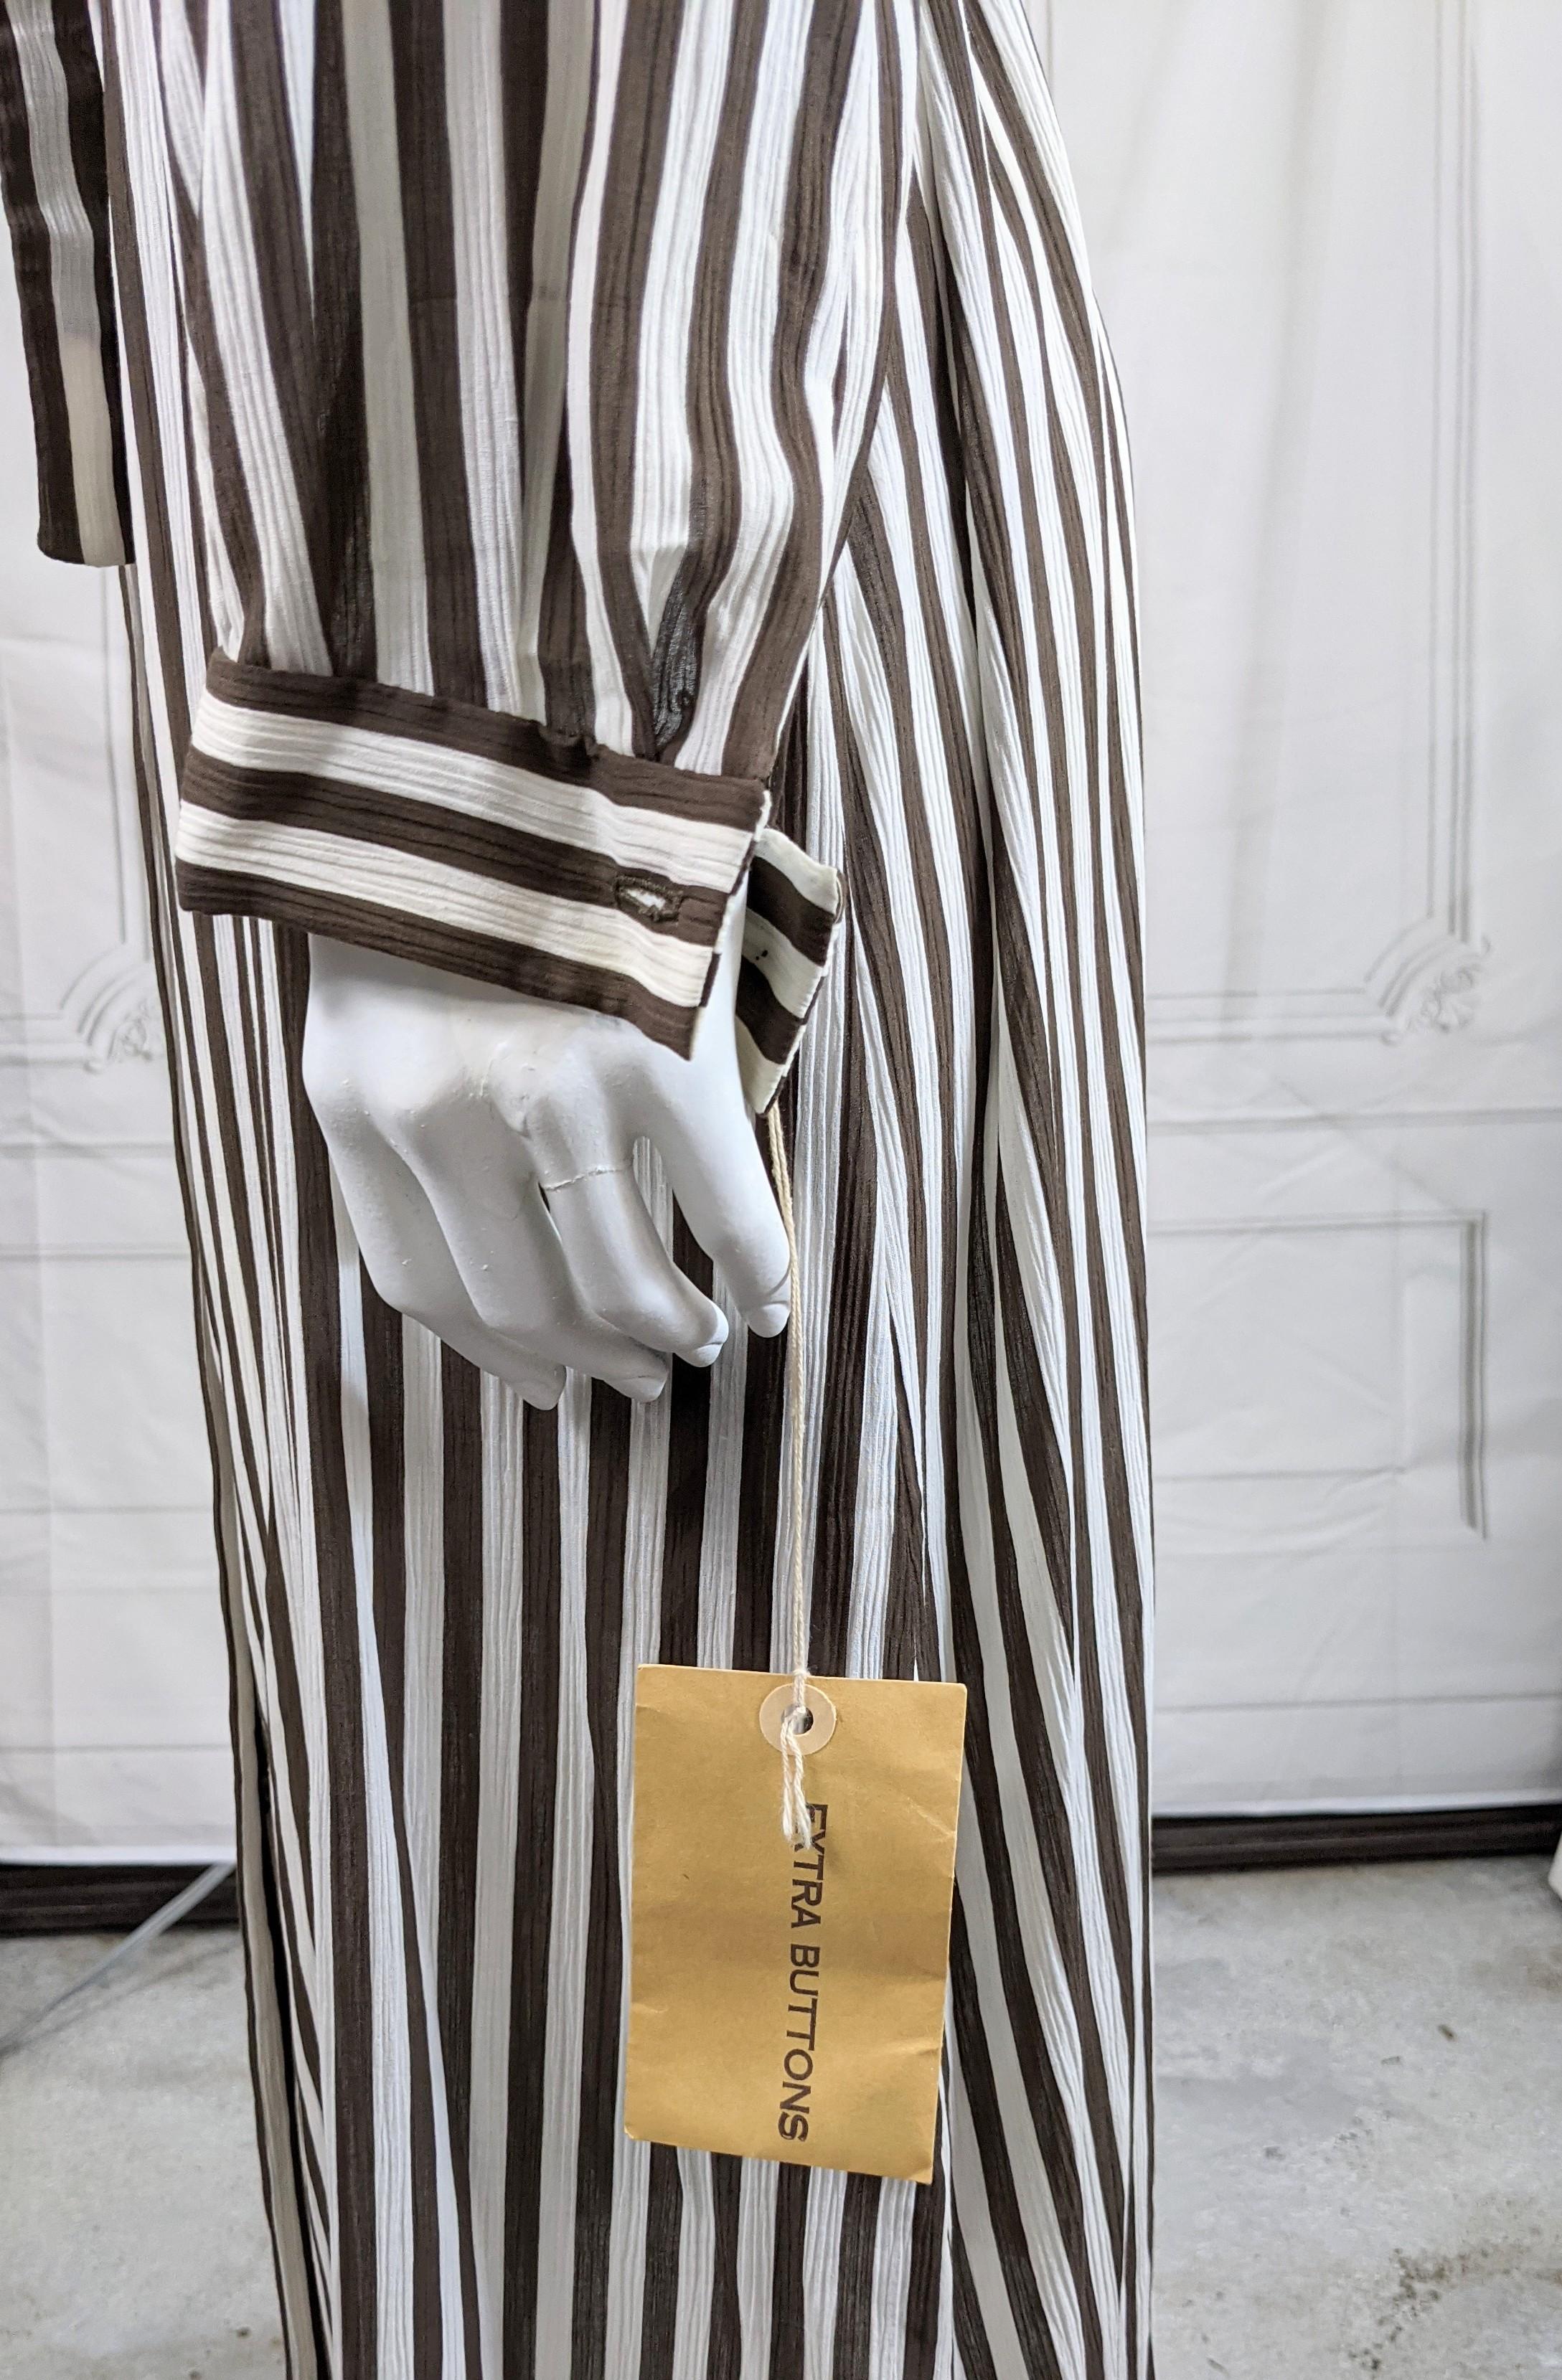 Halston Crinkle Cotton Striped Day Dress In Excellent Condition For Sale In New York, NY